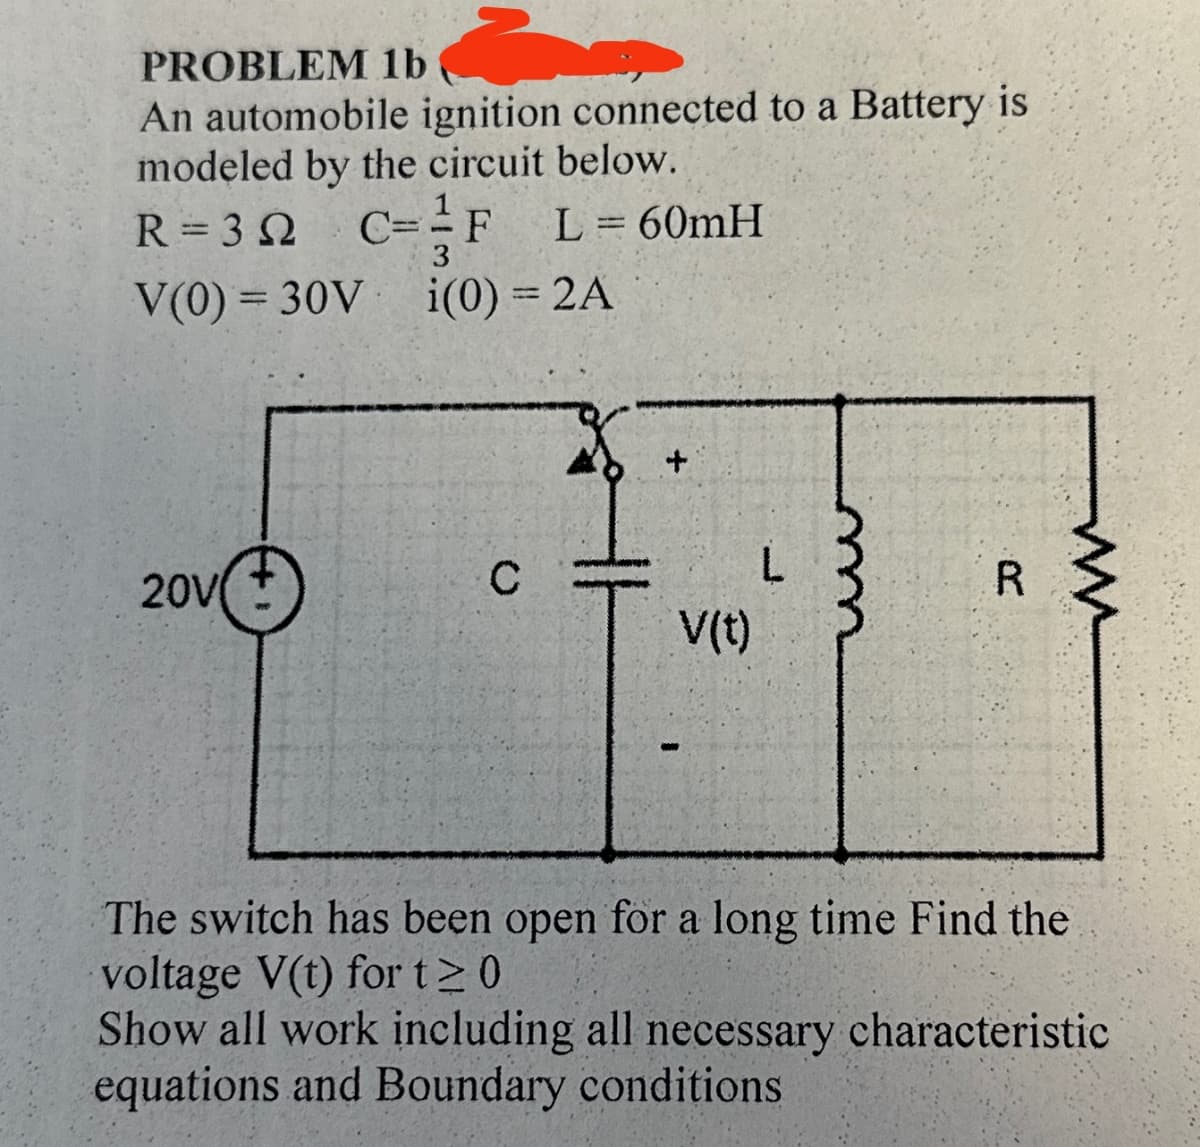 PROBLEM 1b
An automobile ignition connected to a Battery is
modeled by the circuit below.
C=F
R = 3 Ω
3
V(0) 30V
L=60mH
i(0) = 2A
+
20V
C
V(t)
L
ww
R
ww
The switch has been open for a long time Find the
voltage V(t) for t≥ 0
Show all work including all necessary characteristic
equations and Boundary conditions